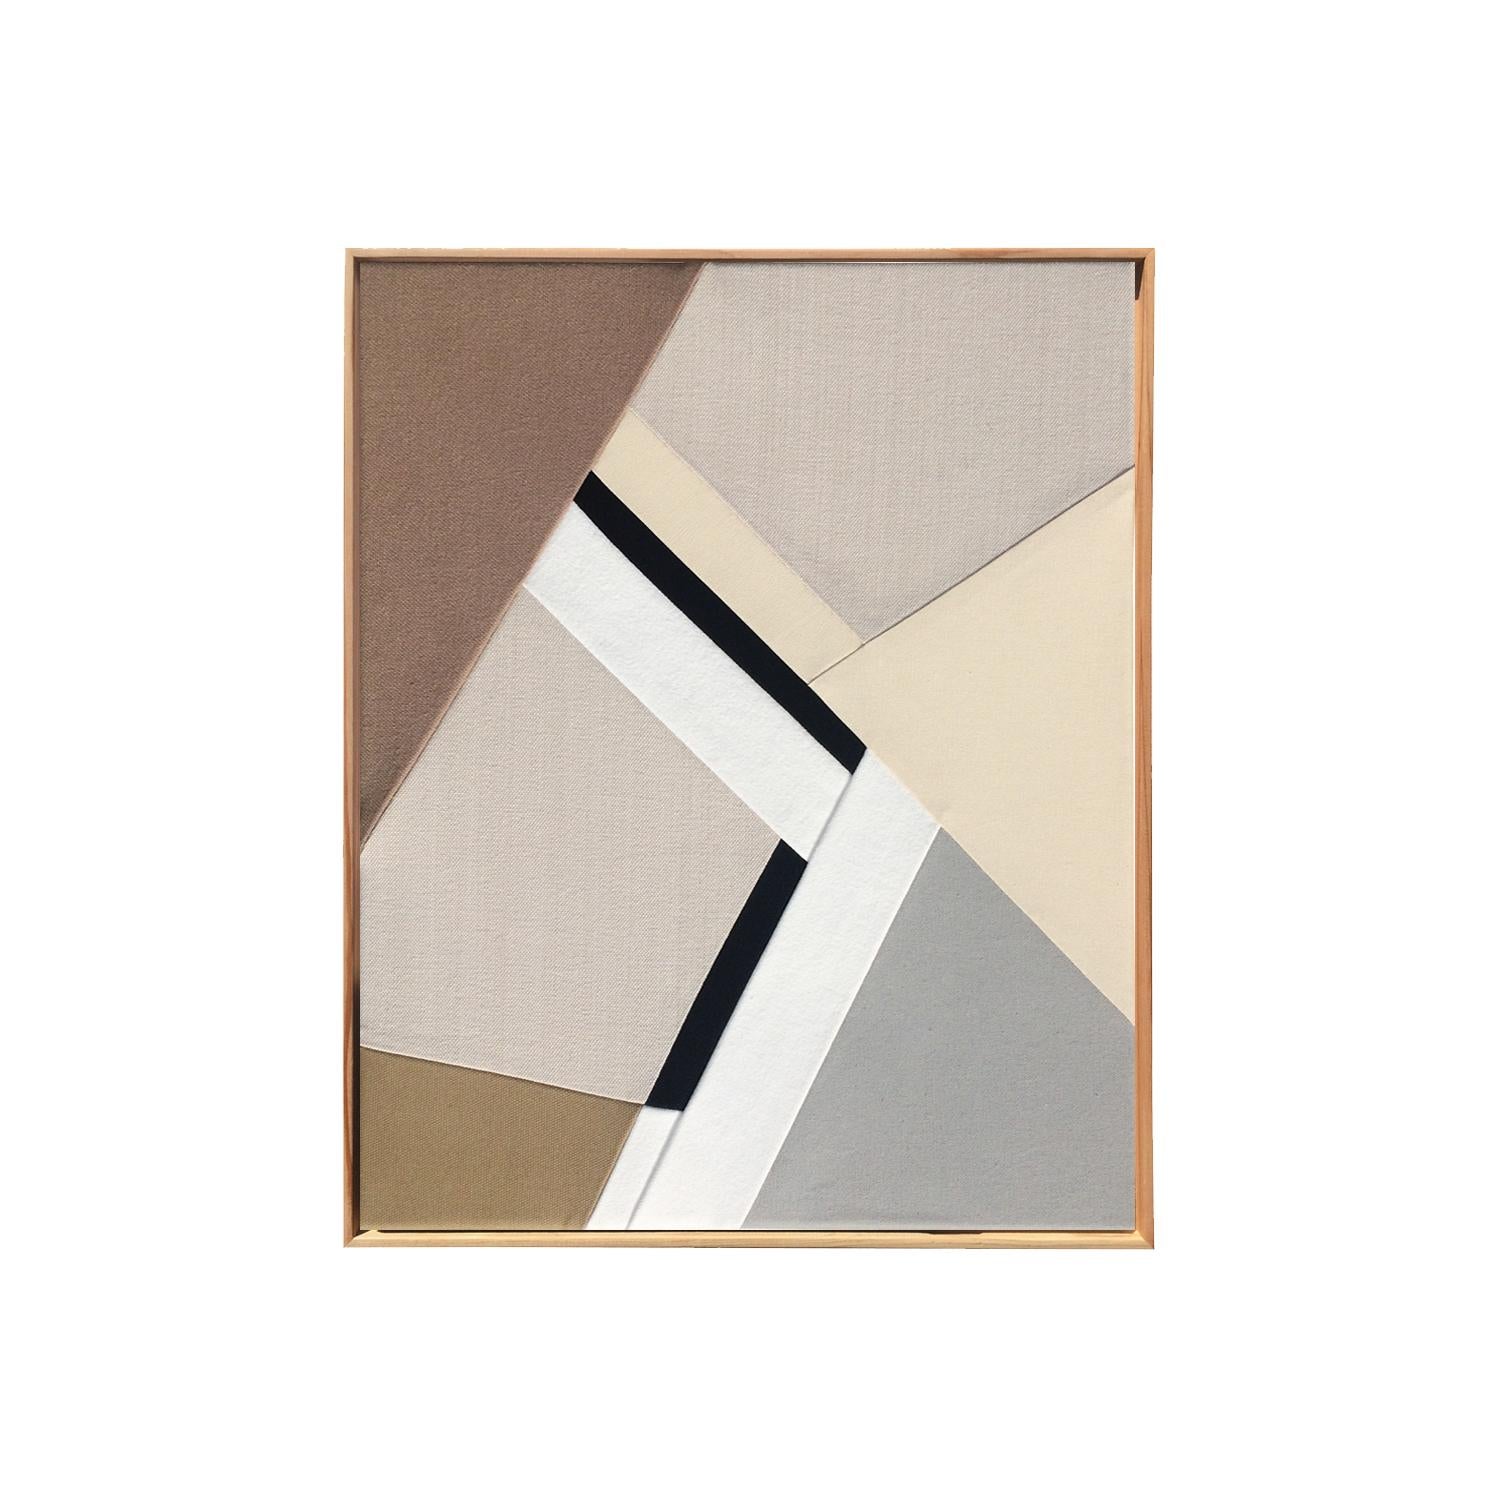 Meike Legler Abstract Painting - The landslide (textile taupe art black and white beige fabric abstract geometric